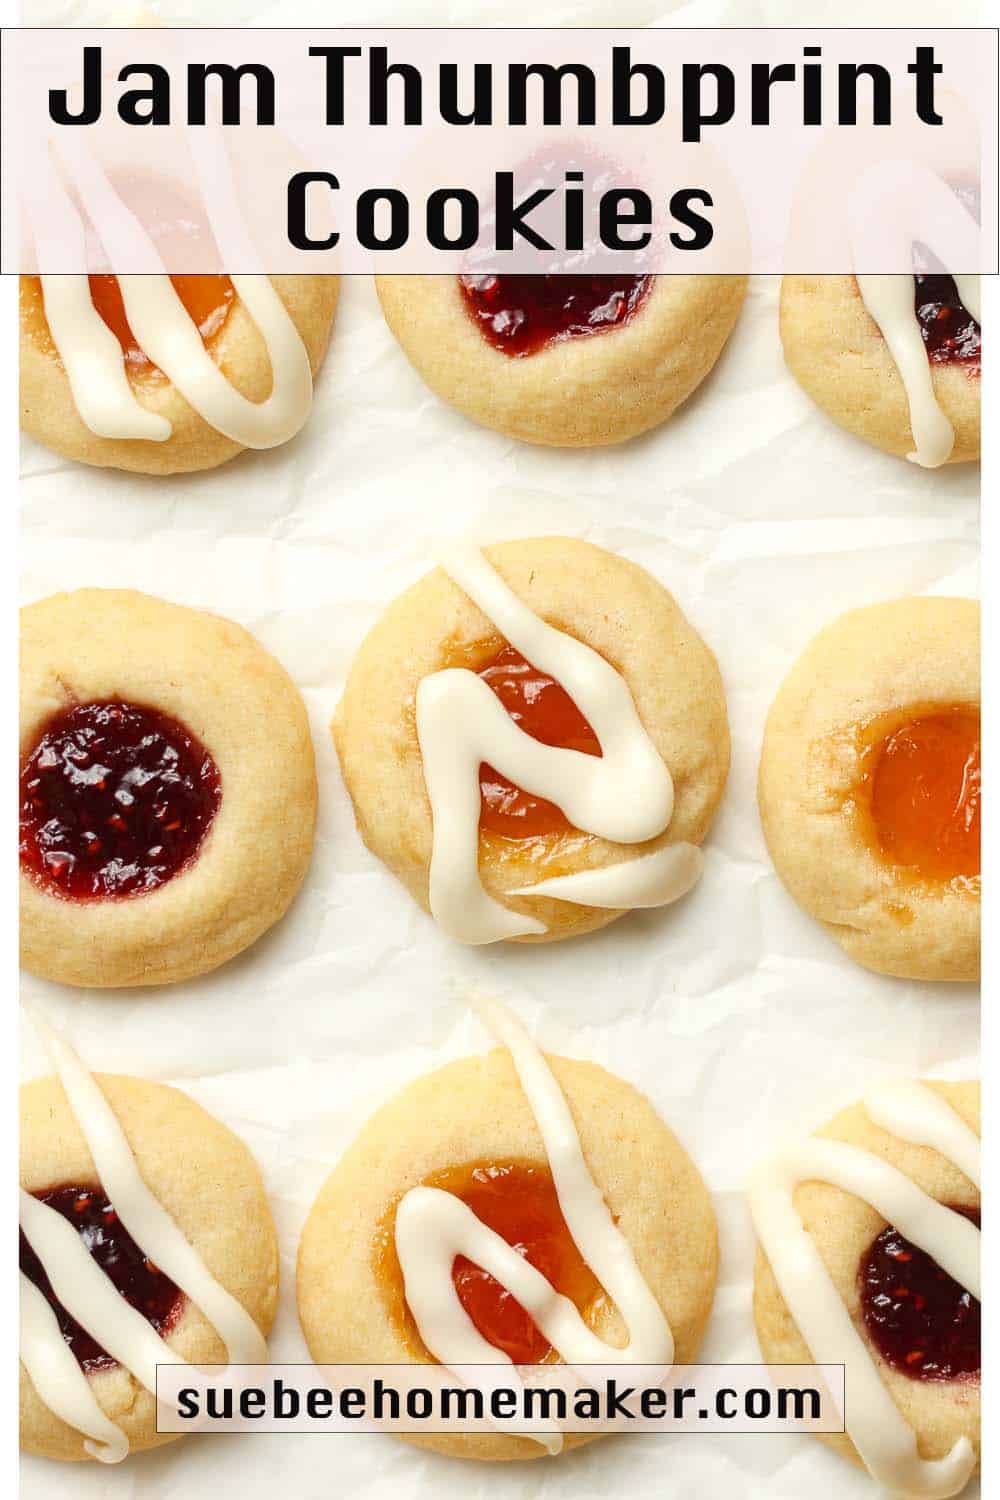 Several jam thumbprint cookies on white parchment paper.